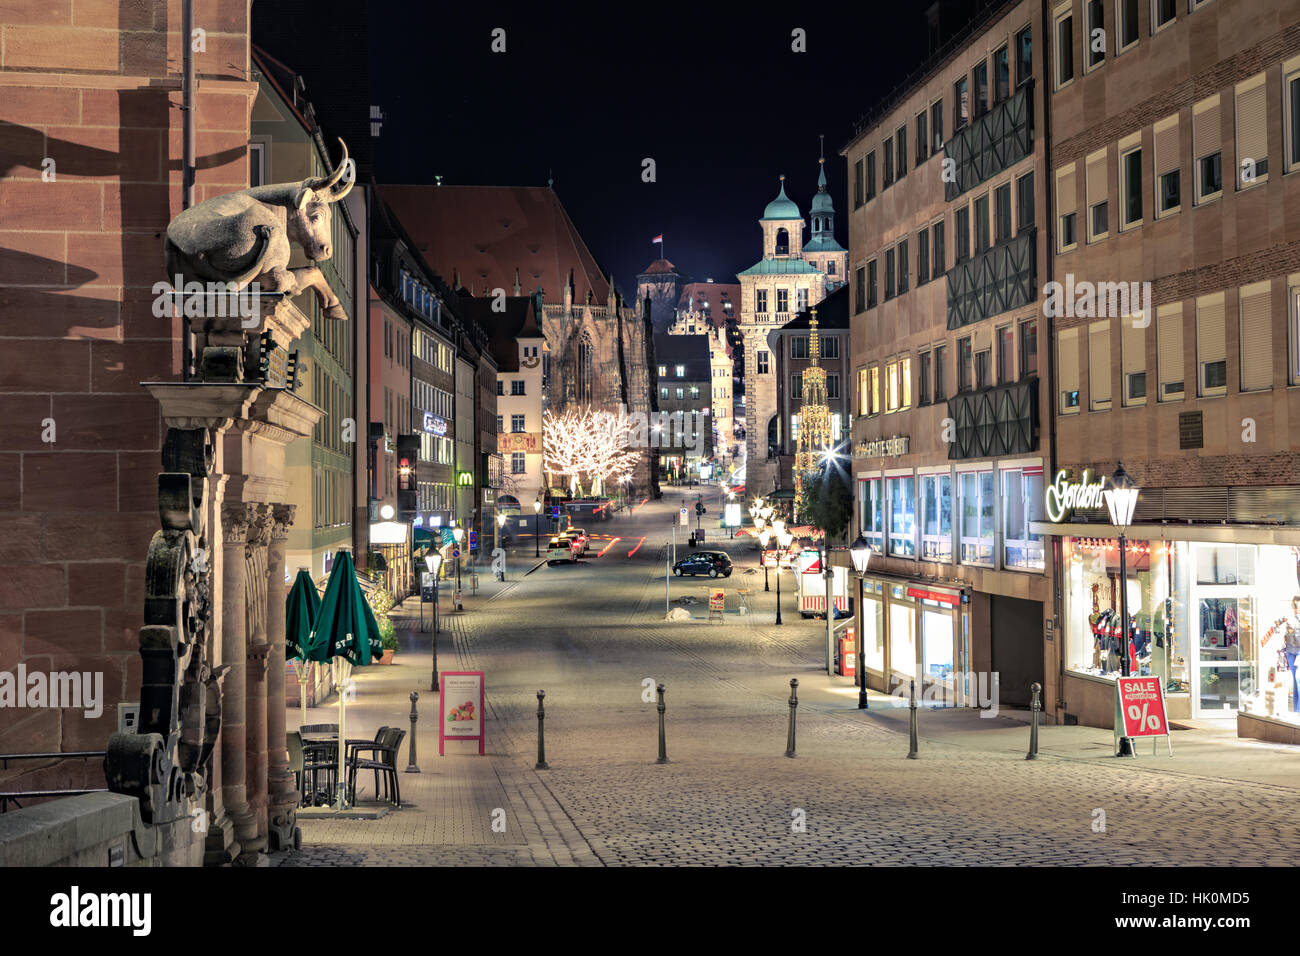 NUREMBERG, GERMANY - CIRCA OCTOBER, 2016: The streets of Nuremberg town by night, Germany Stock Photo